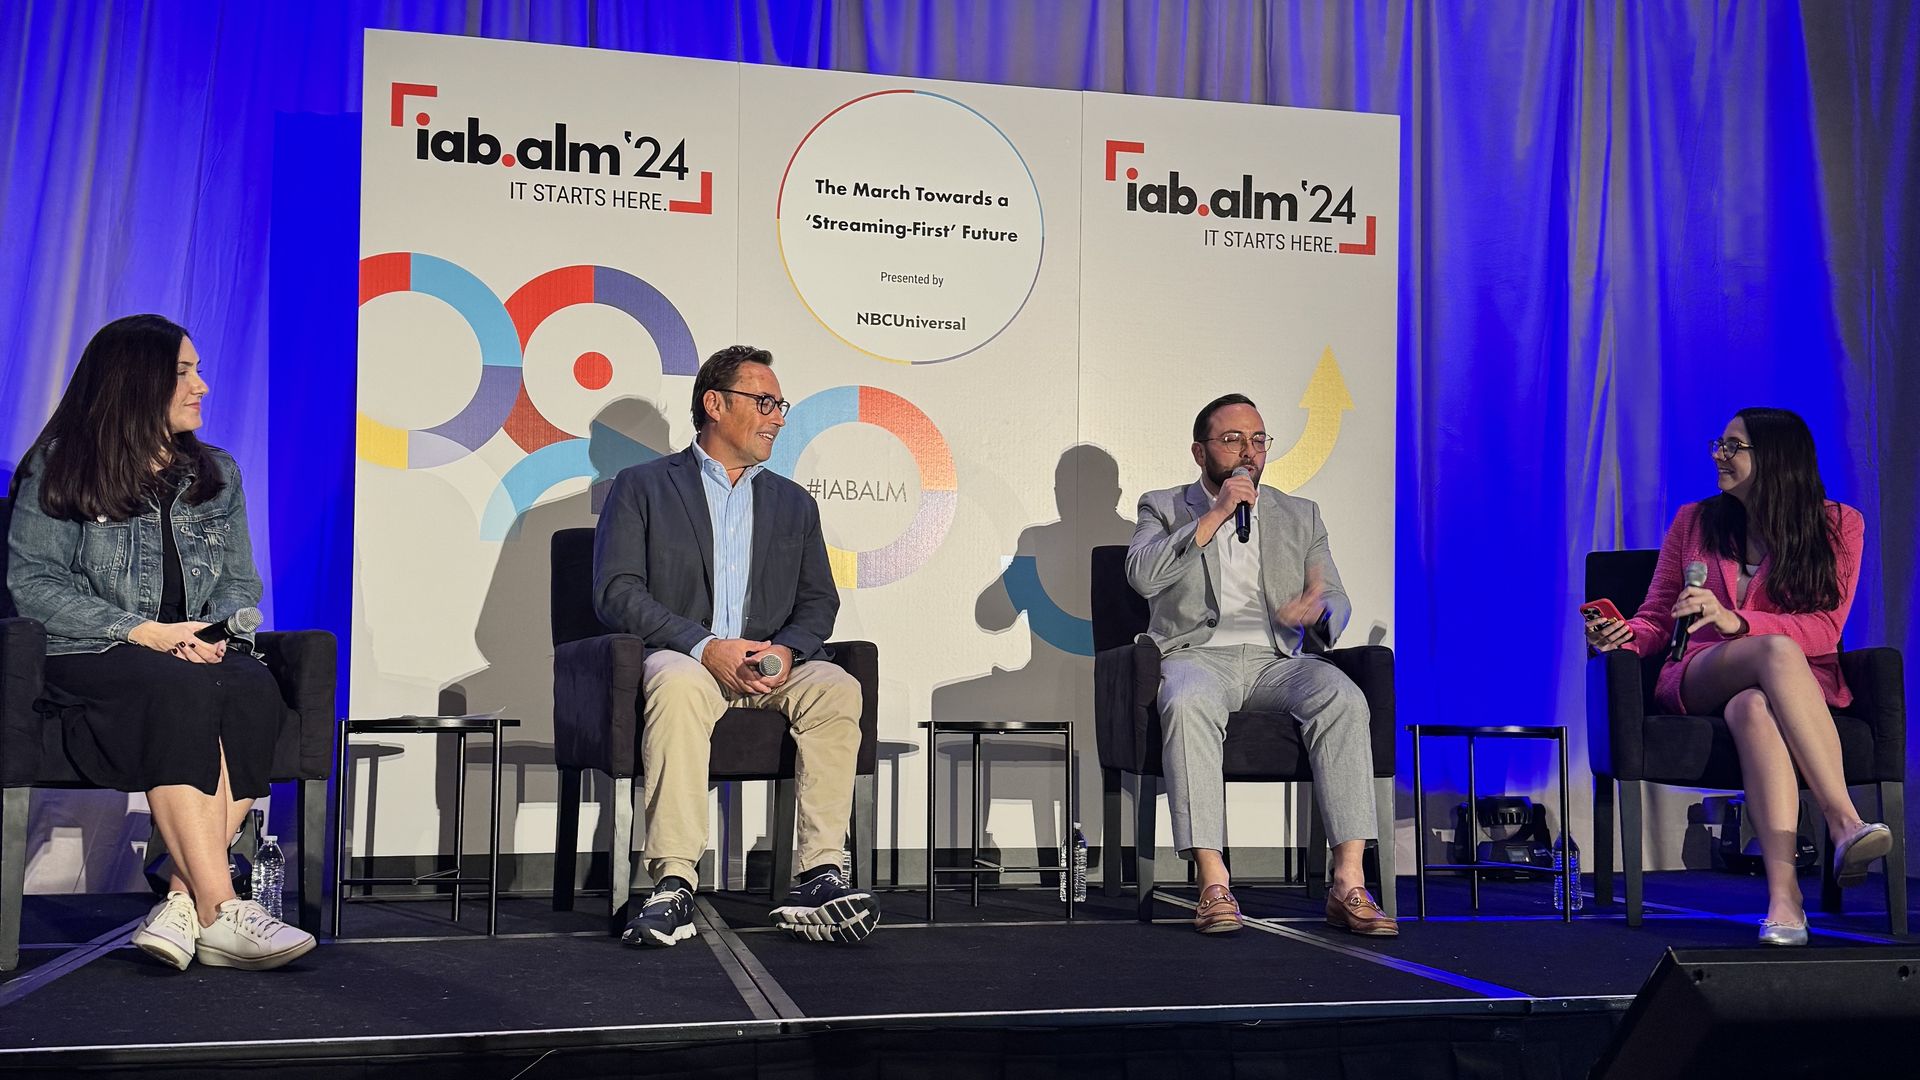 GroupM's Jessica Brown, NBCUniversal's Peter E. Blacker Unilever's Aaron Sobol and Axios' Kerry Flynn sitting on chairs on a stage with IAB ALM '24 in the background